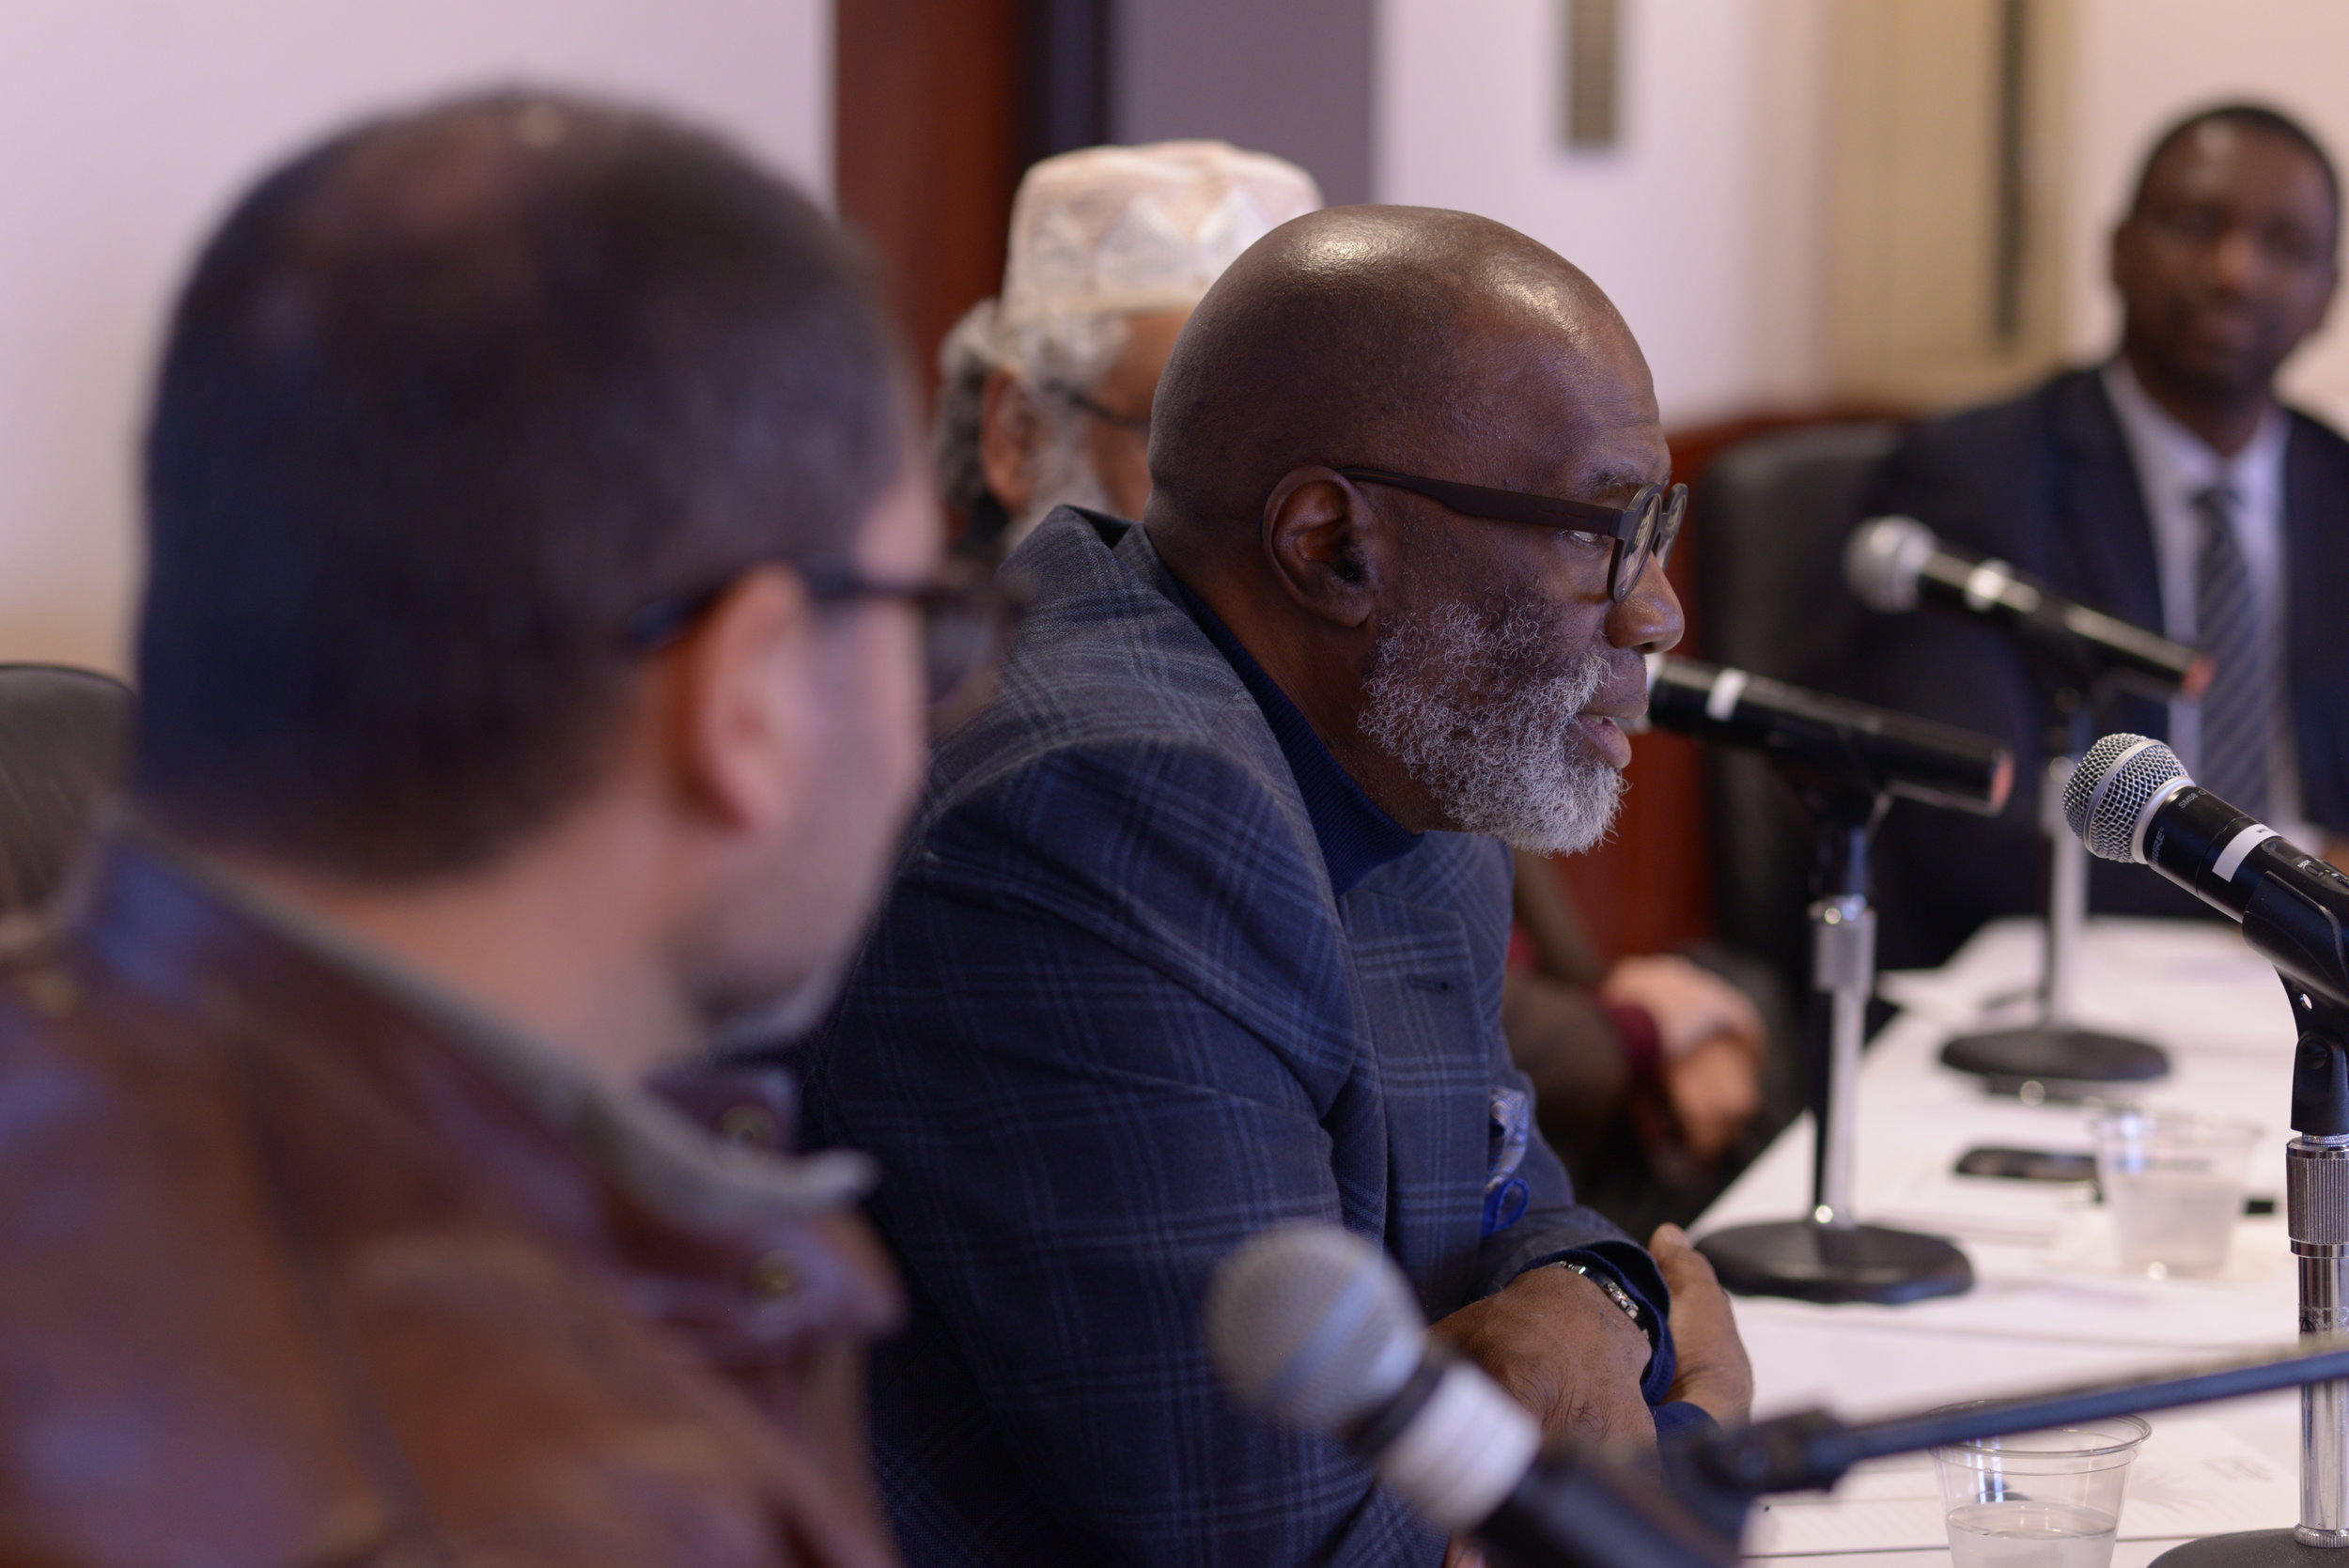 Sherman Jackson, scholar of Islam in the West and the King Faisal Chair in Islamic Thought and Culture and the University of Southern California, raised the issue of religious freedom as a right and responsibility.